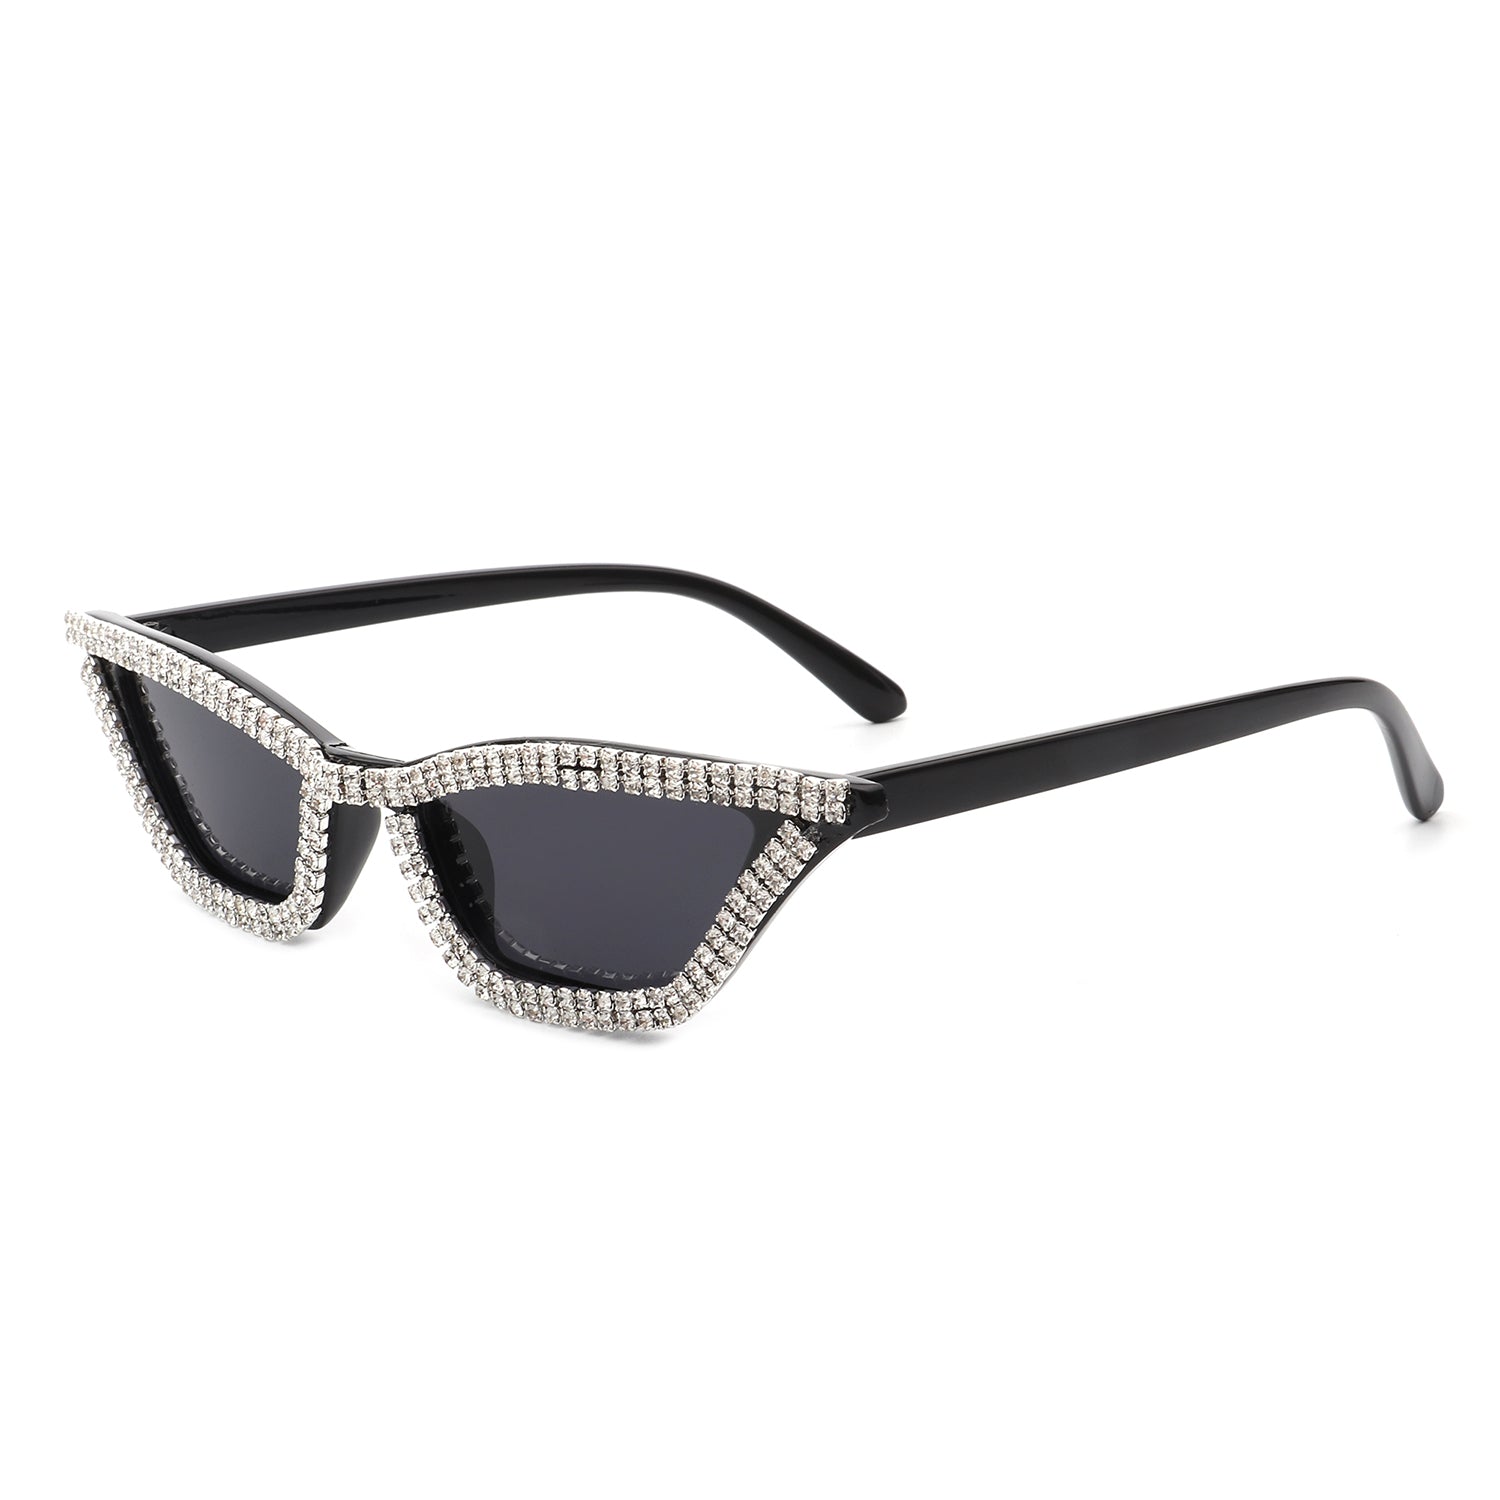 Get the best deals on Rimless Vintage Sunglasses when you shop the